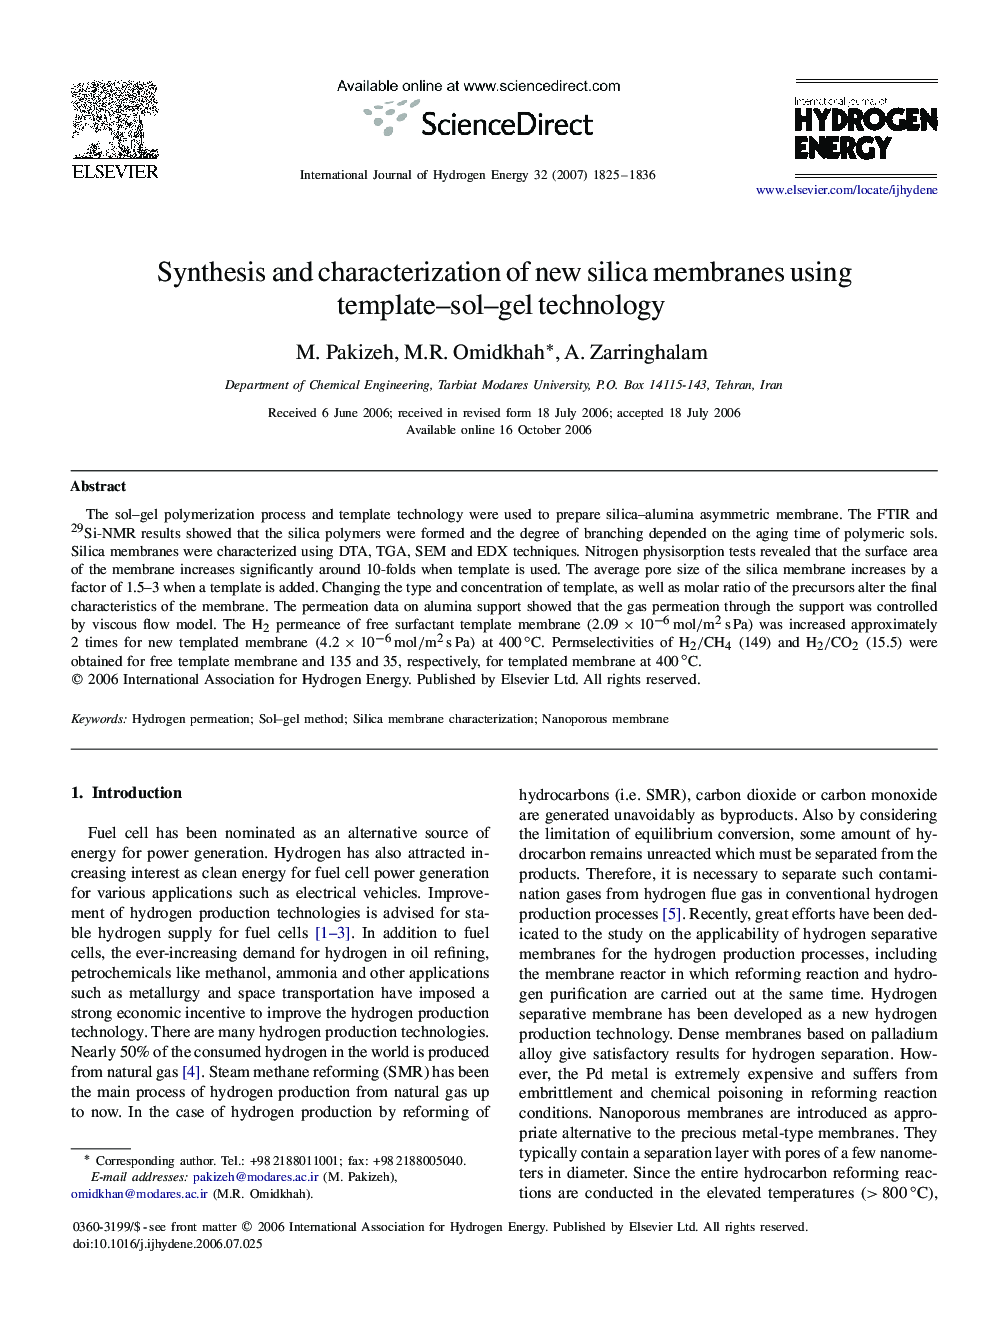 Synthesis and characterization of new silica membranes using template–sol–gel technology